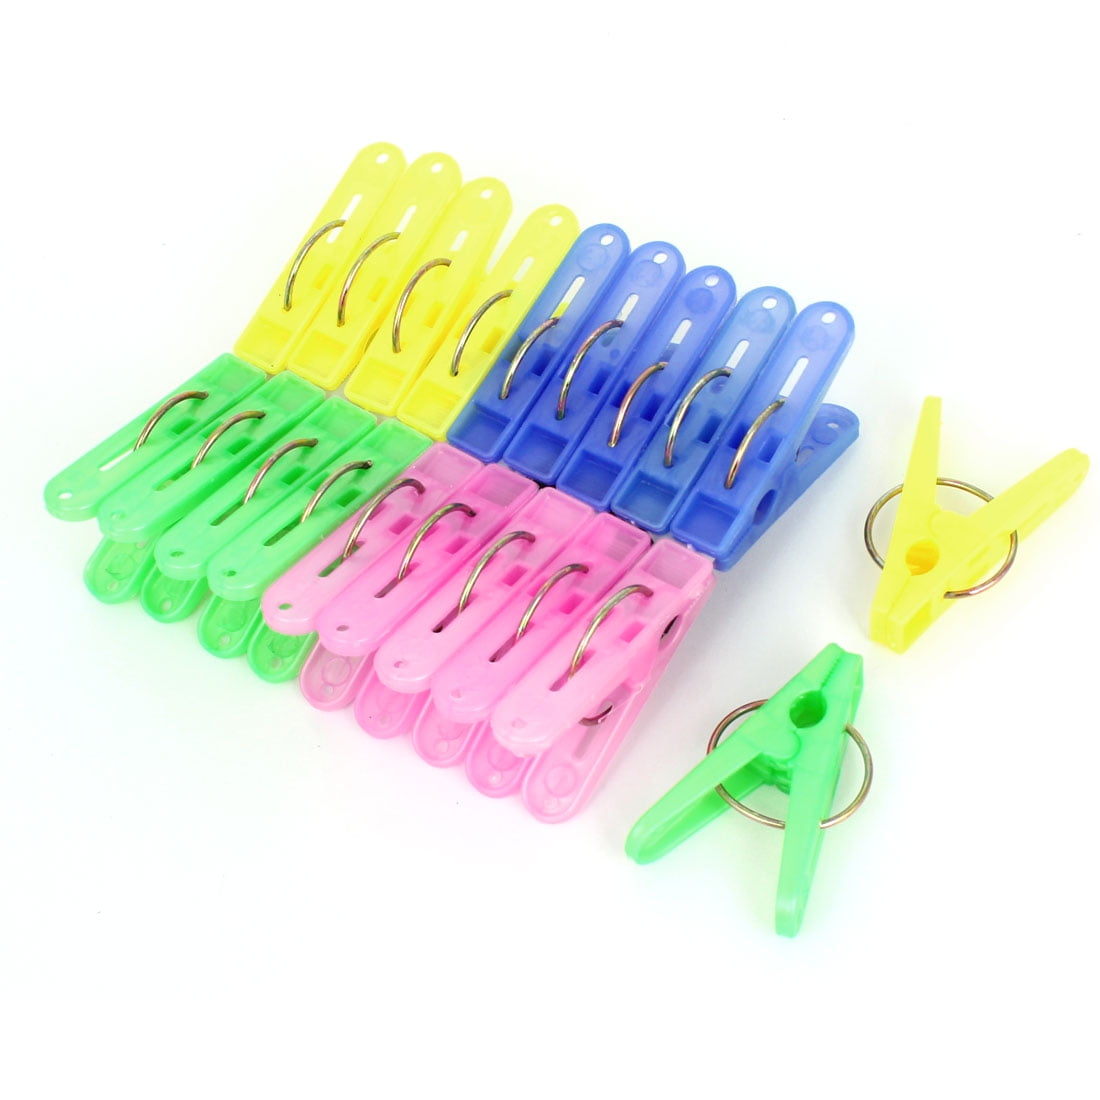 7Pcs Sock Clips Socks Holder Rings Colorful sock Organizers Sorters Locks  Clips Laundry Clothes Pegs - AliExpress